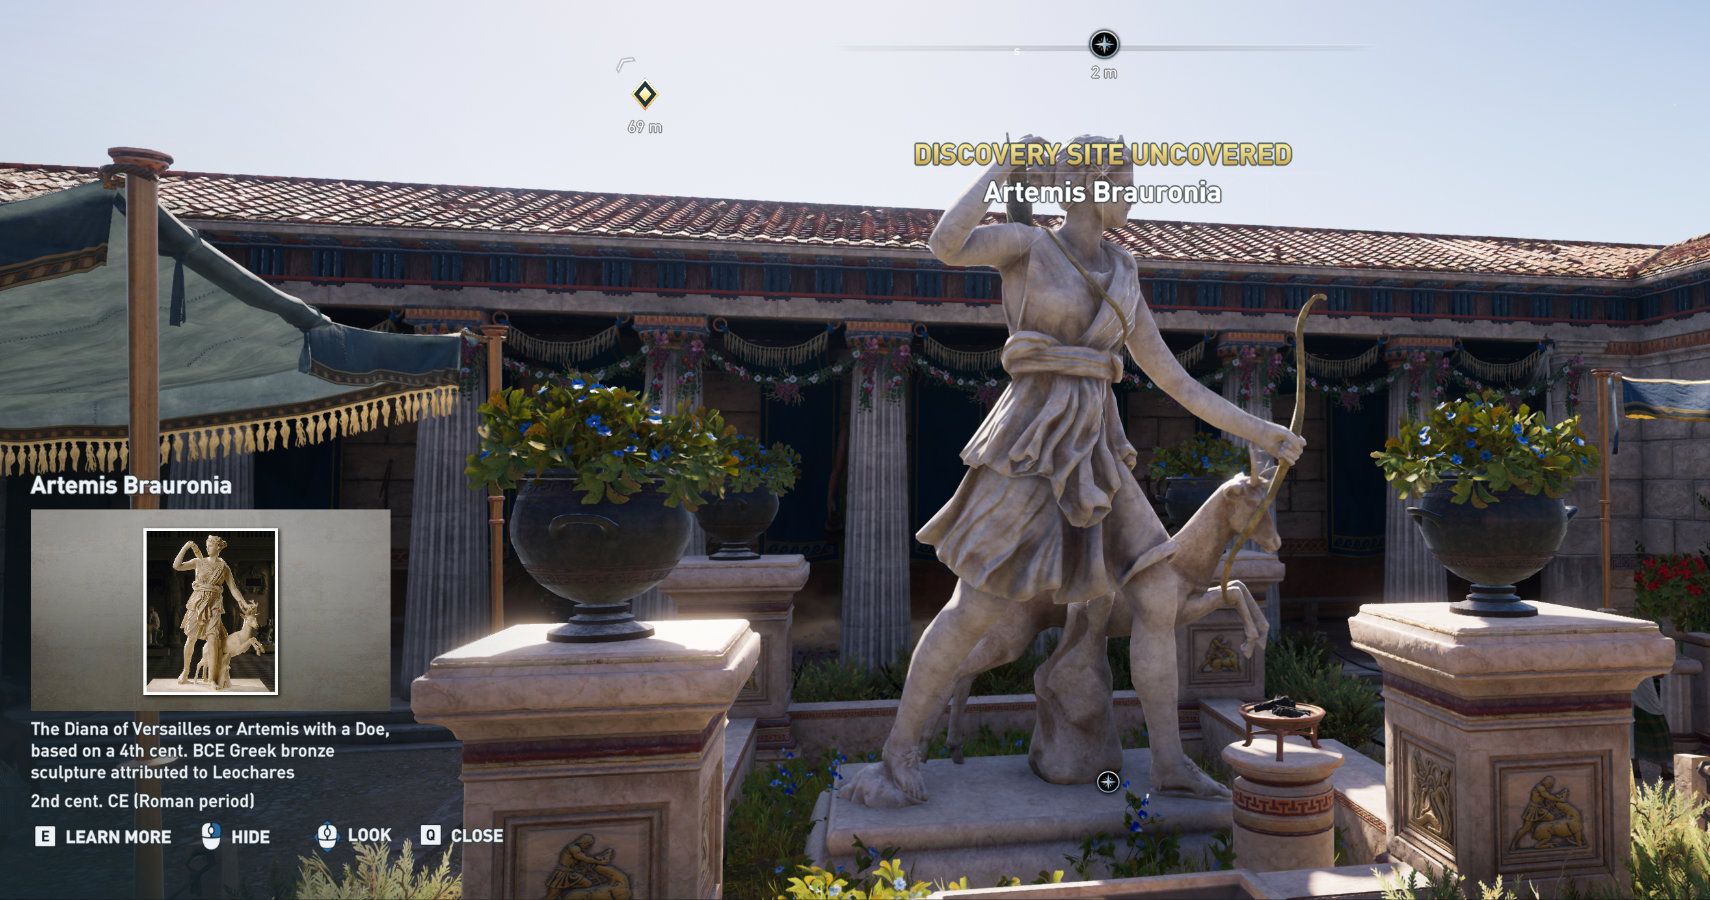 The Artemis Brauronia in Assassins creed odyssey